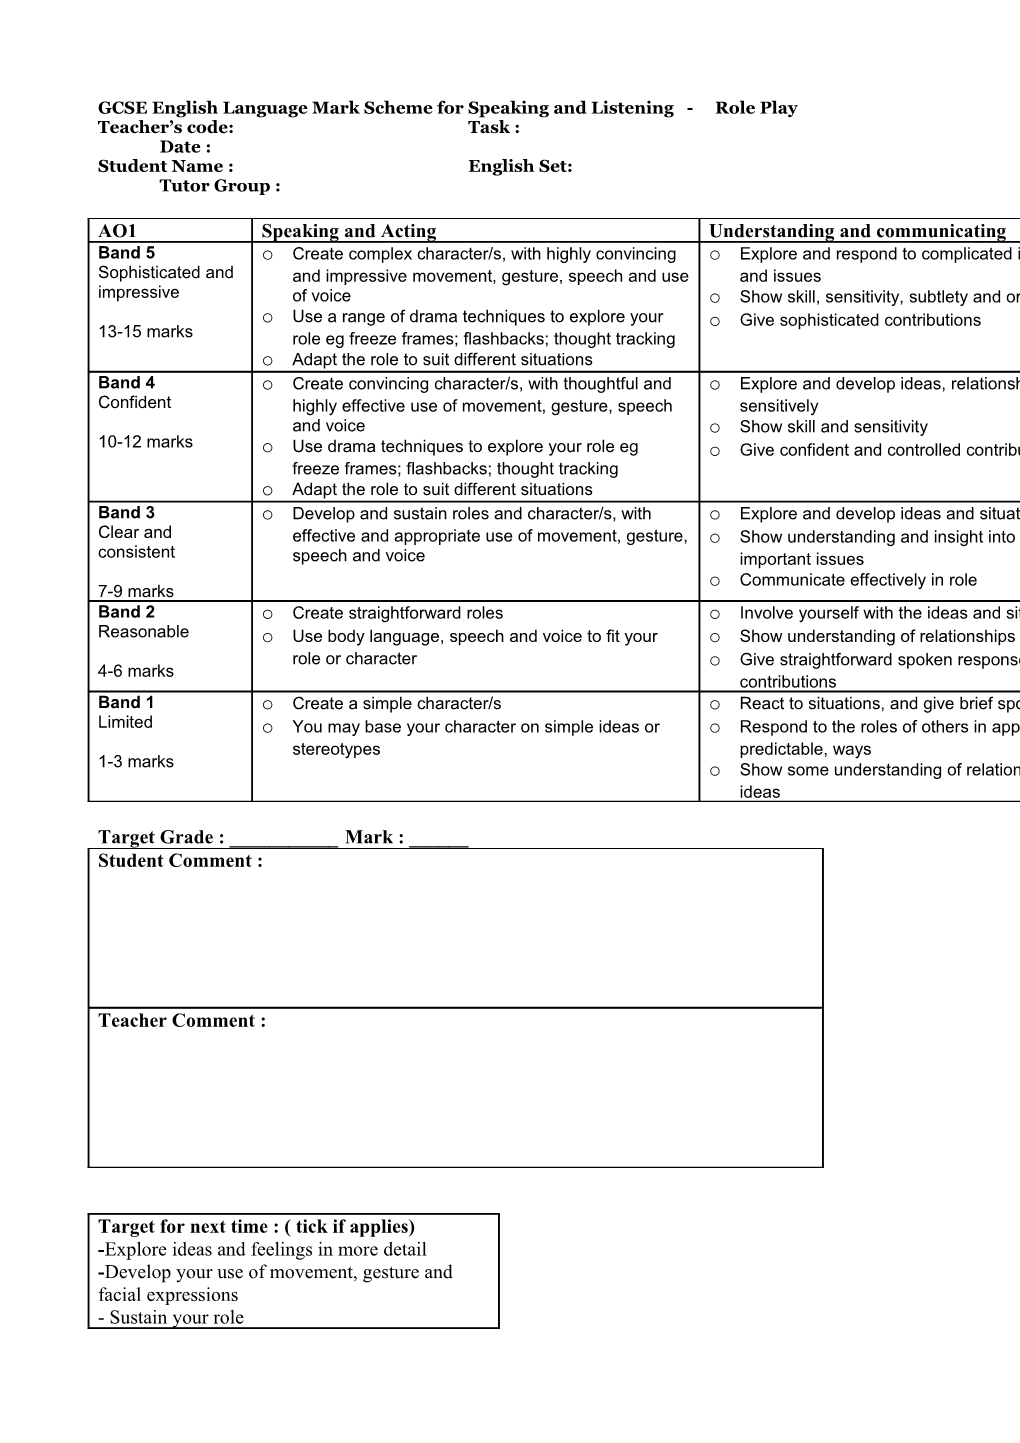 GCSE English Language Mark Scheme for Speaking and Listening - Role Play